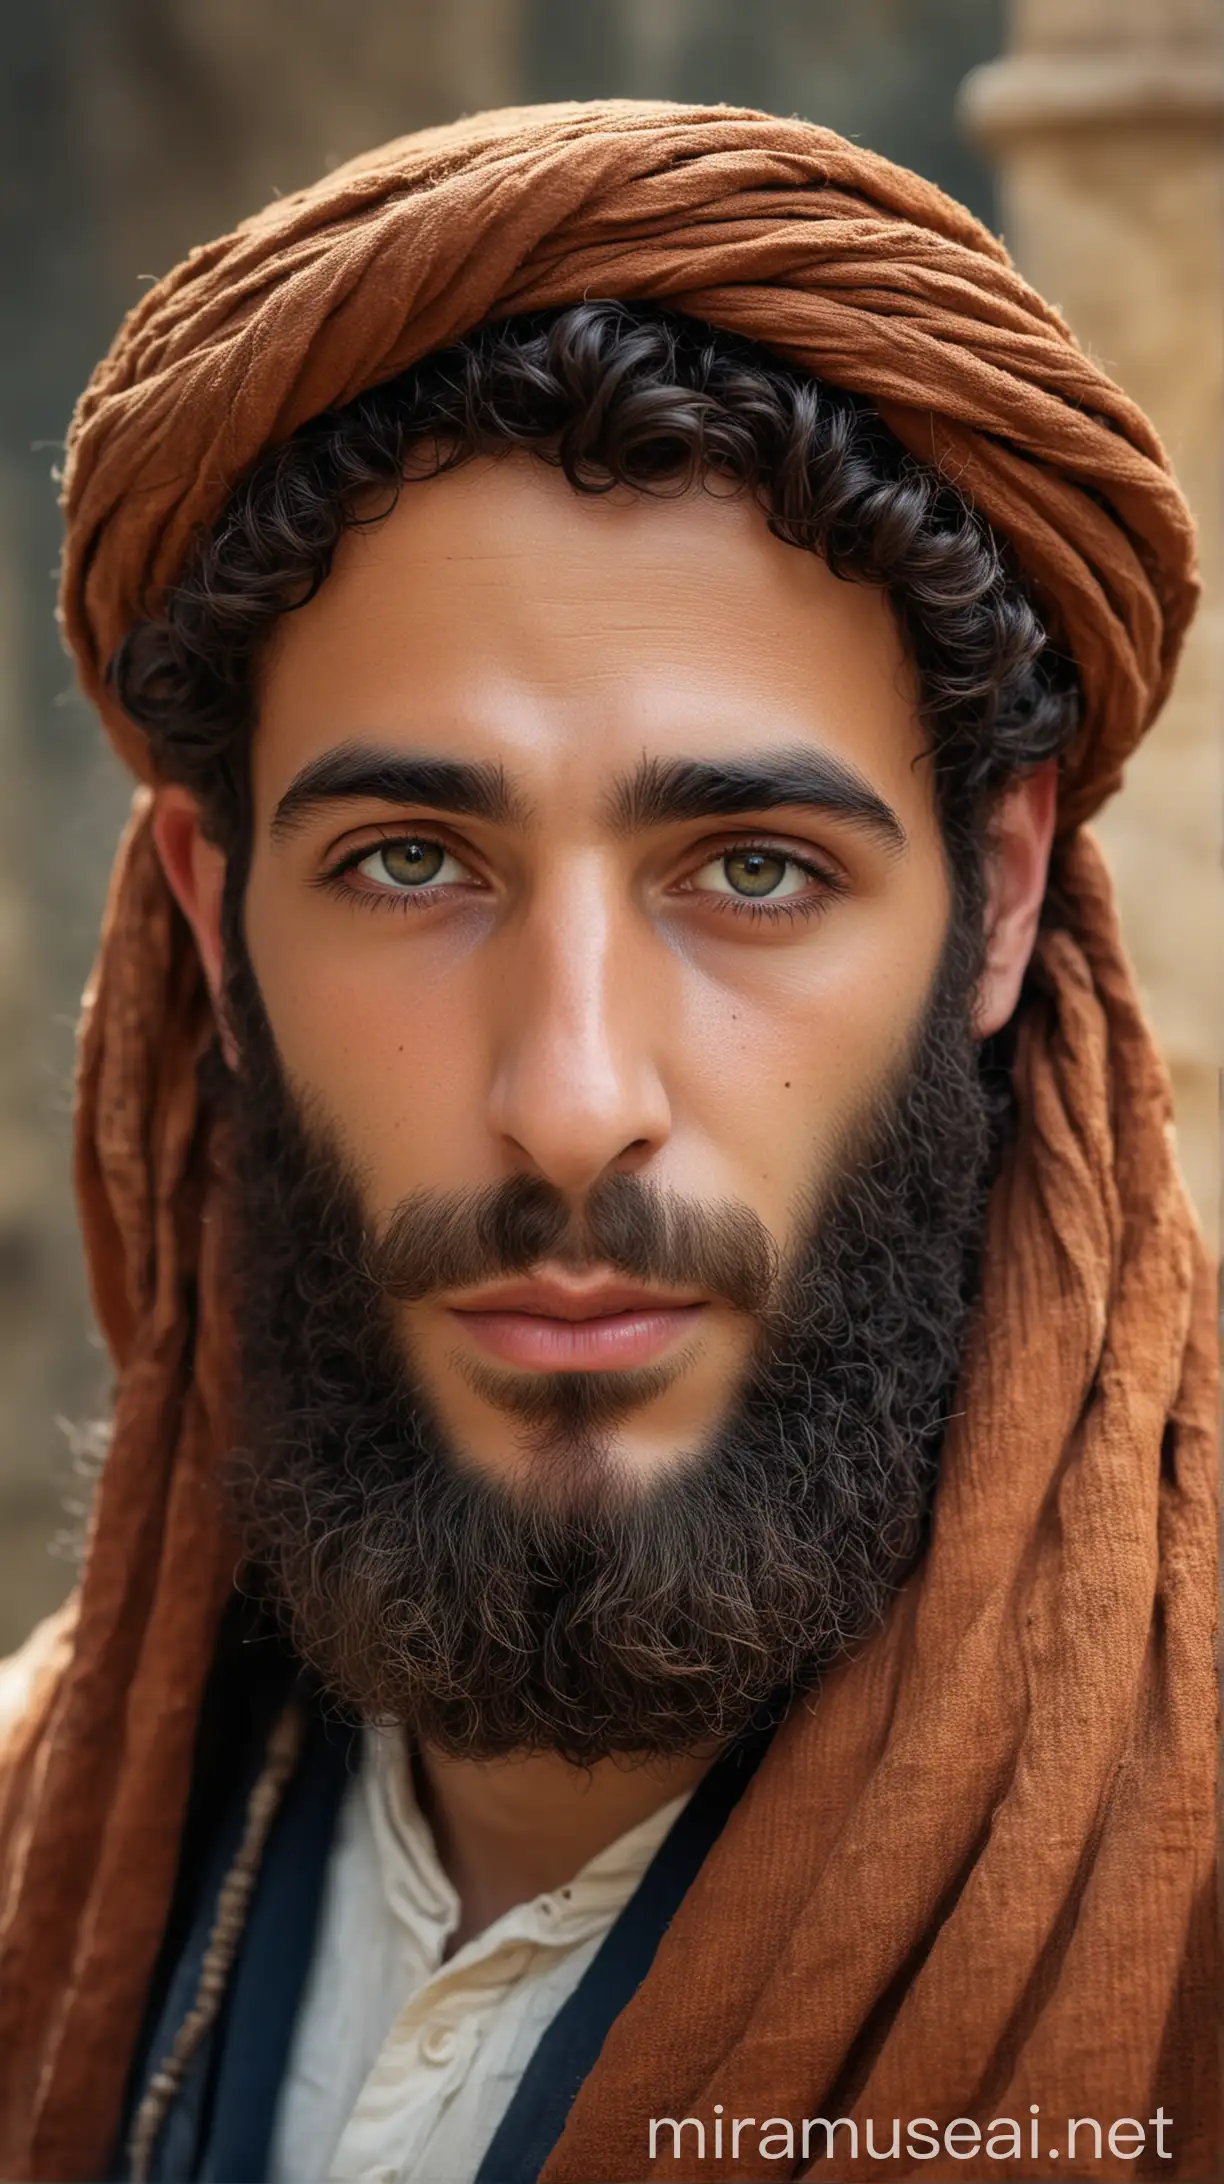 A handsome and vibrant Jewish man in ancient world 